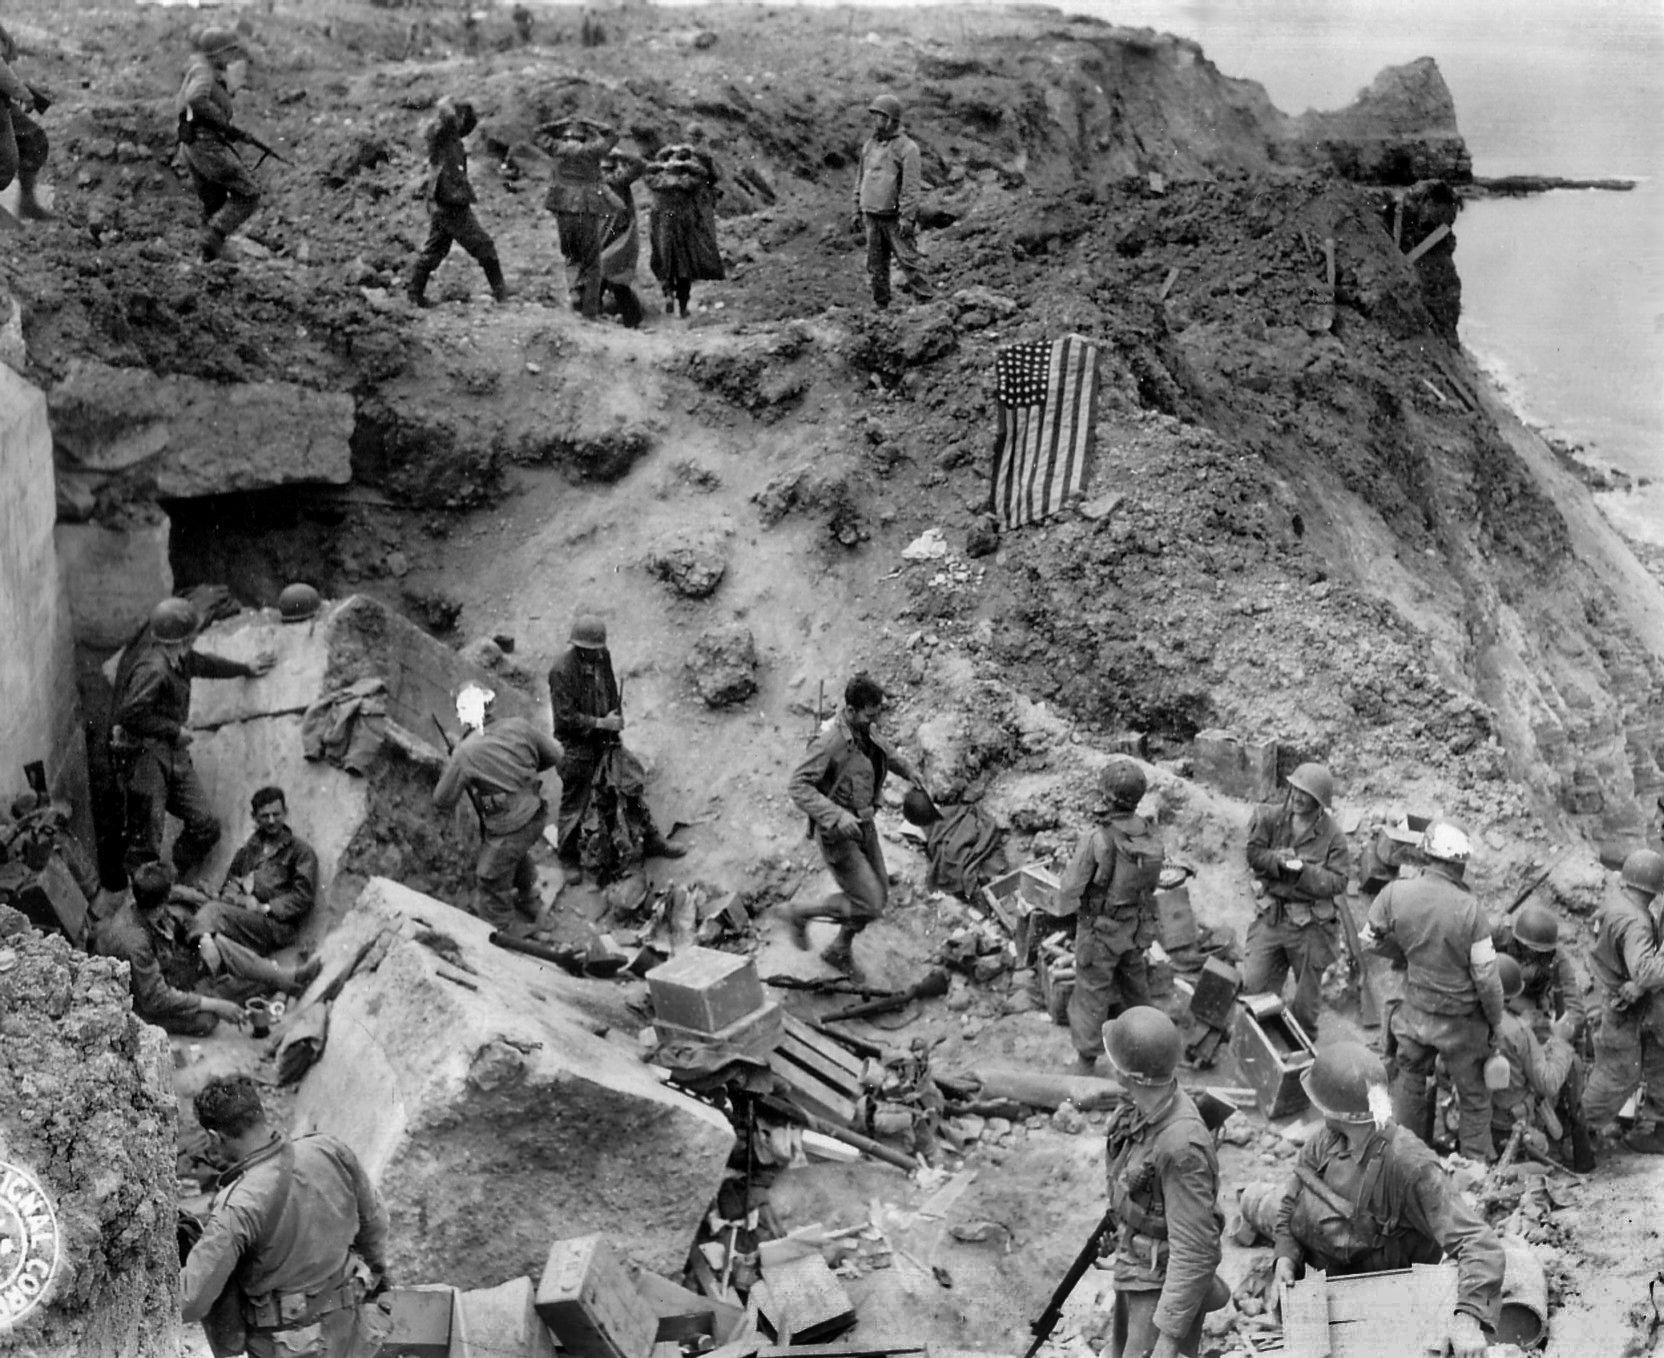 Rangers relax or get medical treatment at Lt. Col. Rudder’s rough-hewn command post while German prisoners march past Rudder, top right. Below him, the U.S. flag is laid out to let Allied ships know that the area is under American control.